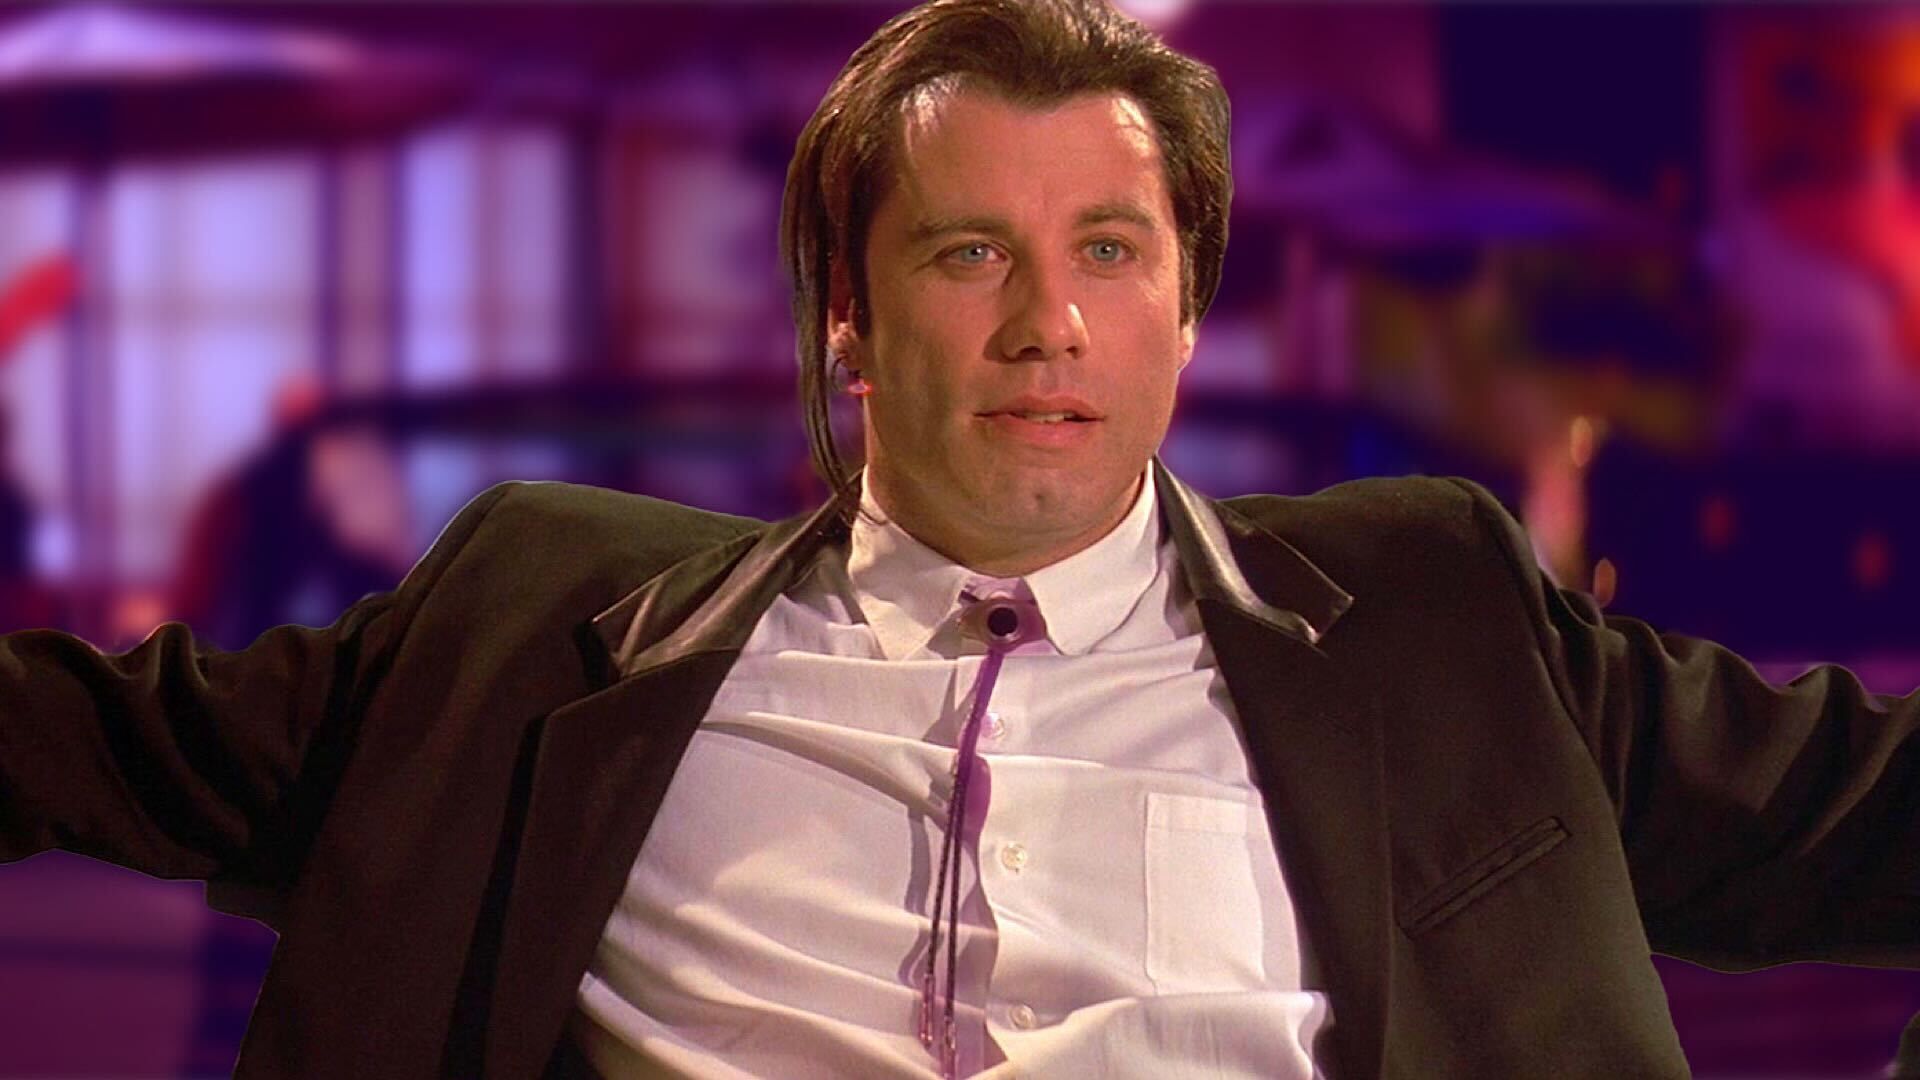 John Travolta leaning back in a chair in Pulp Fiction